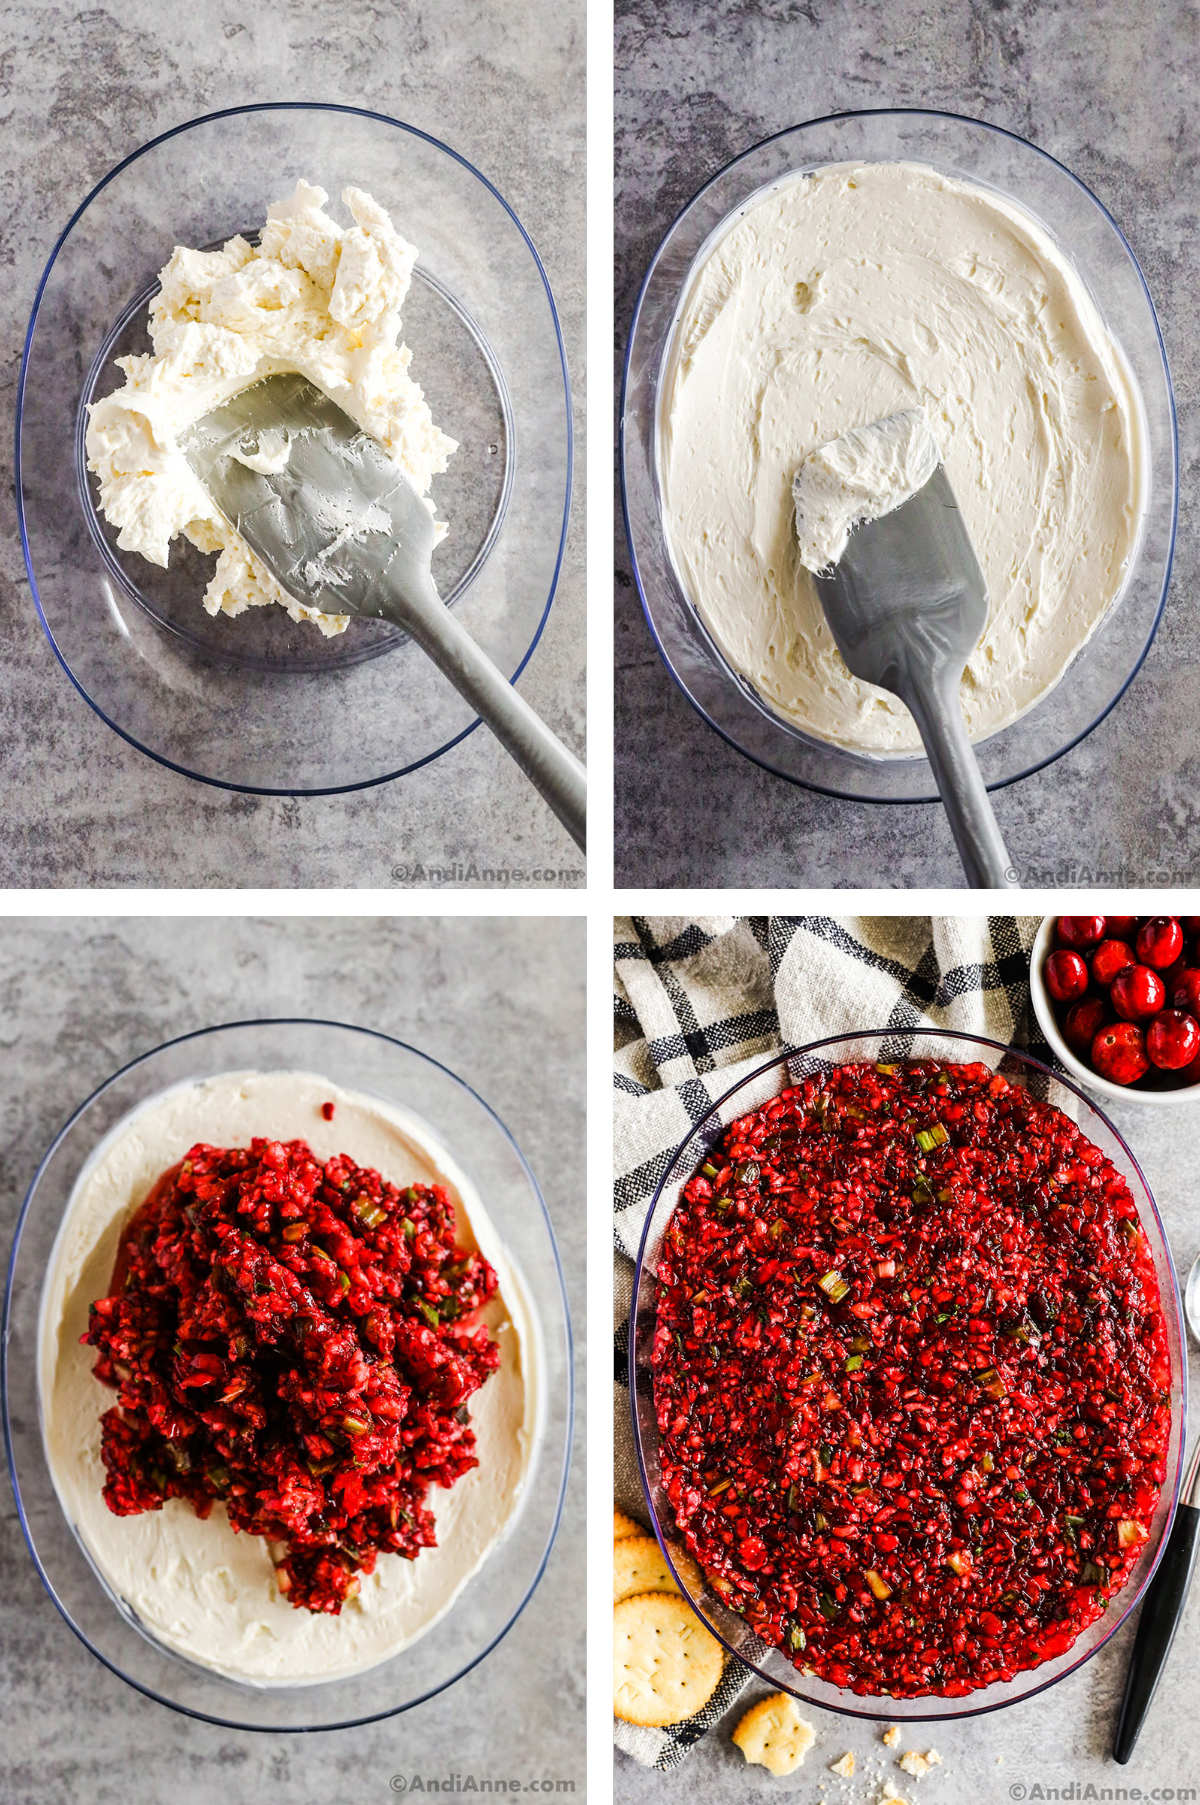 Four overhead images in one: 1. Cream cheese is placed in low profile glass bowl. 2. Cream cheese is spread flat with spatula. 3. Cranberry mixture is placed on top. 4. Cranberry mixture is spread with spatula. The bowl sits on hand towel with crackers in bottom left and fresh cranberries in top right. 